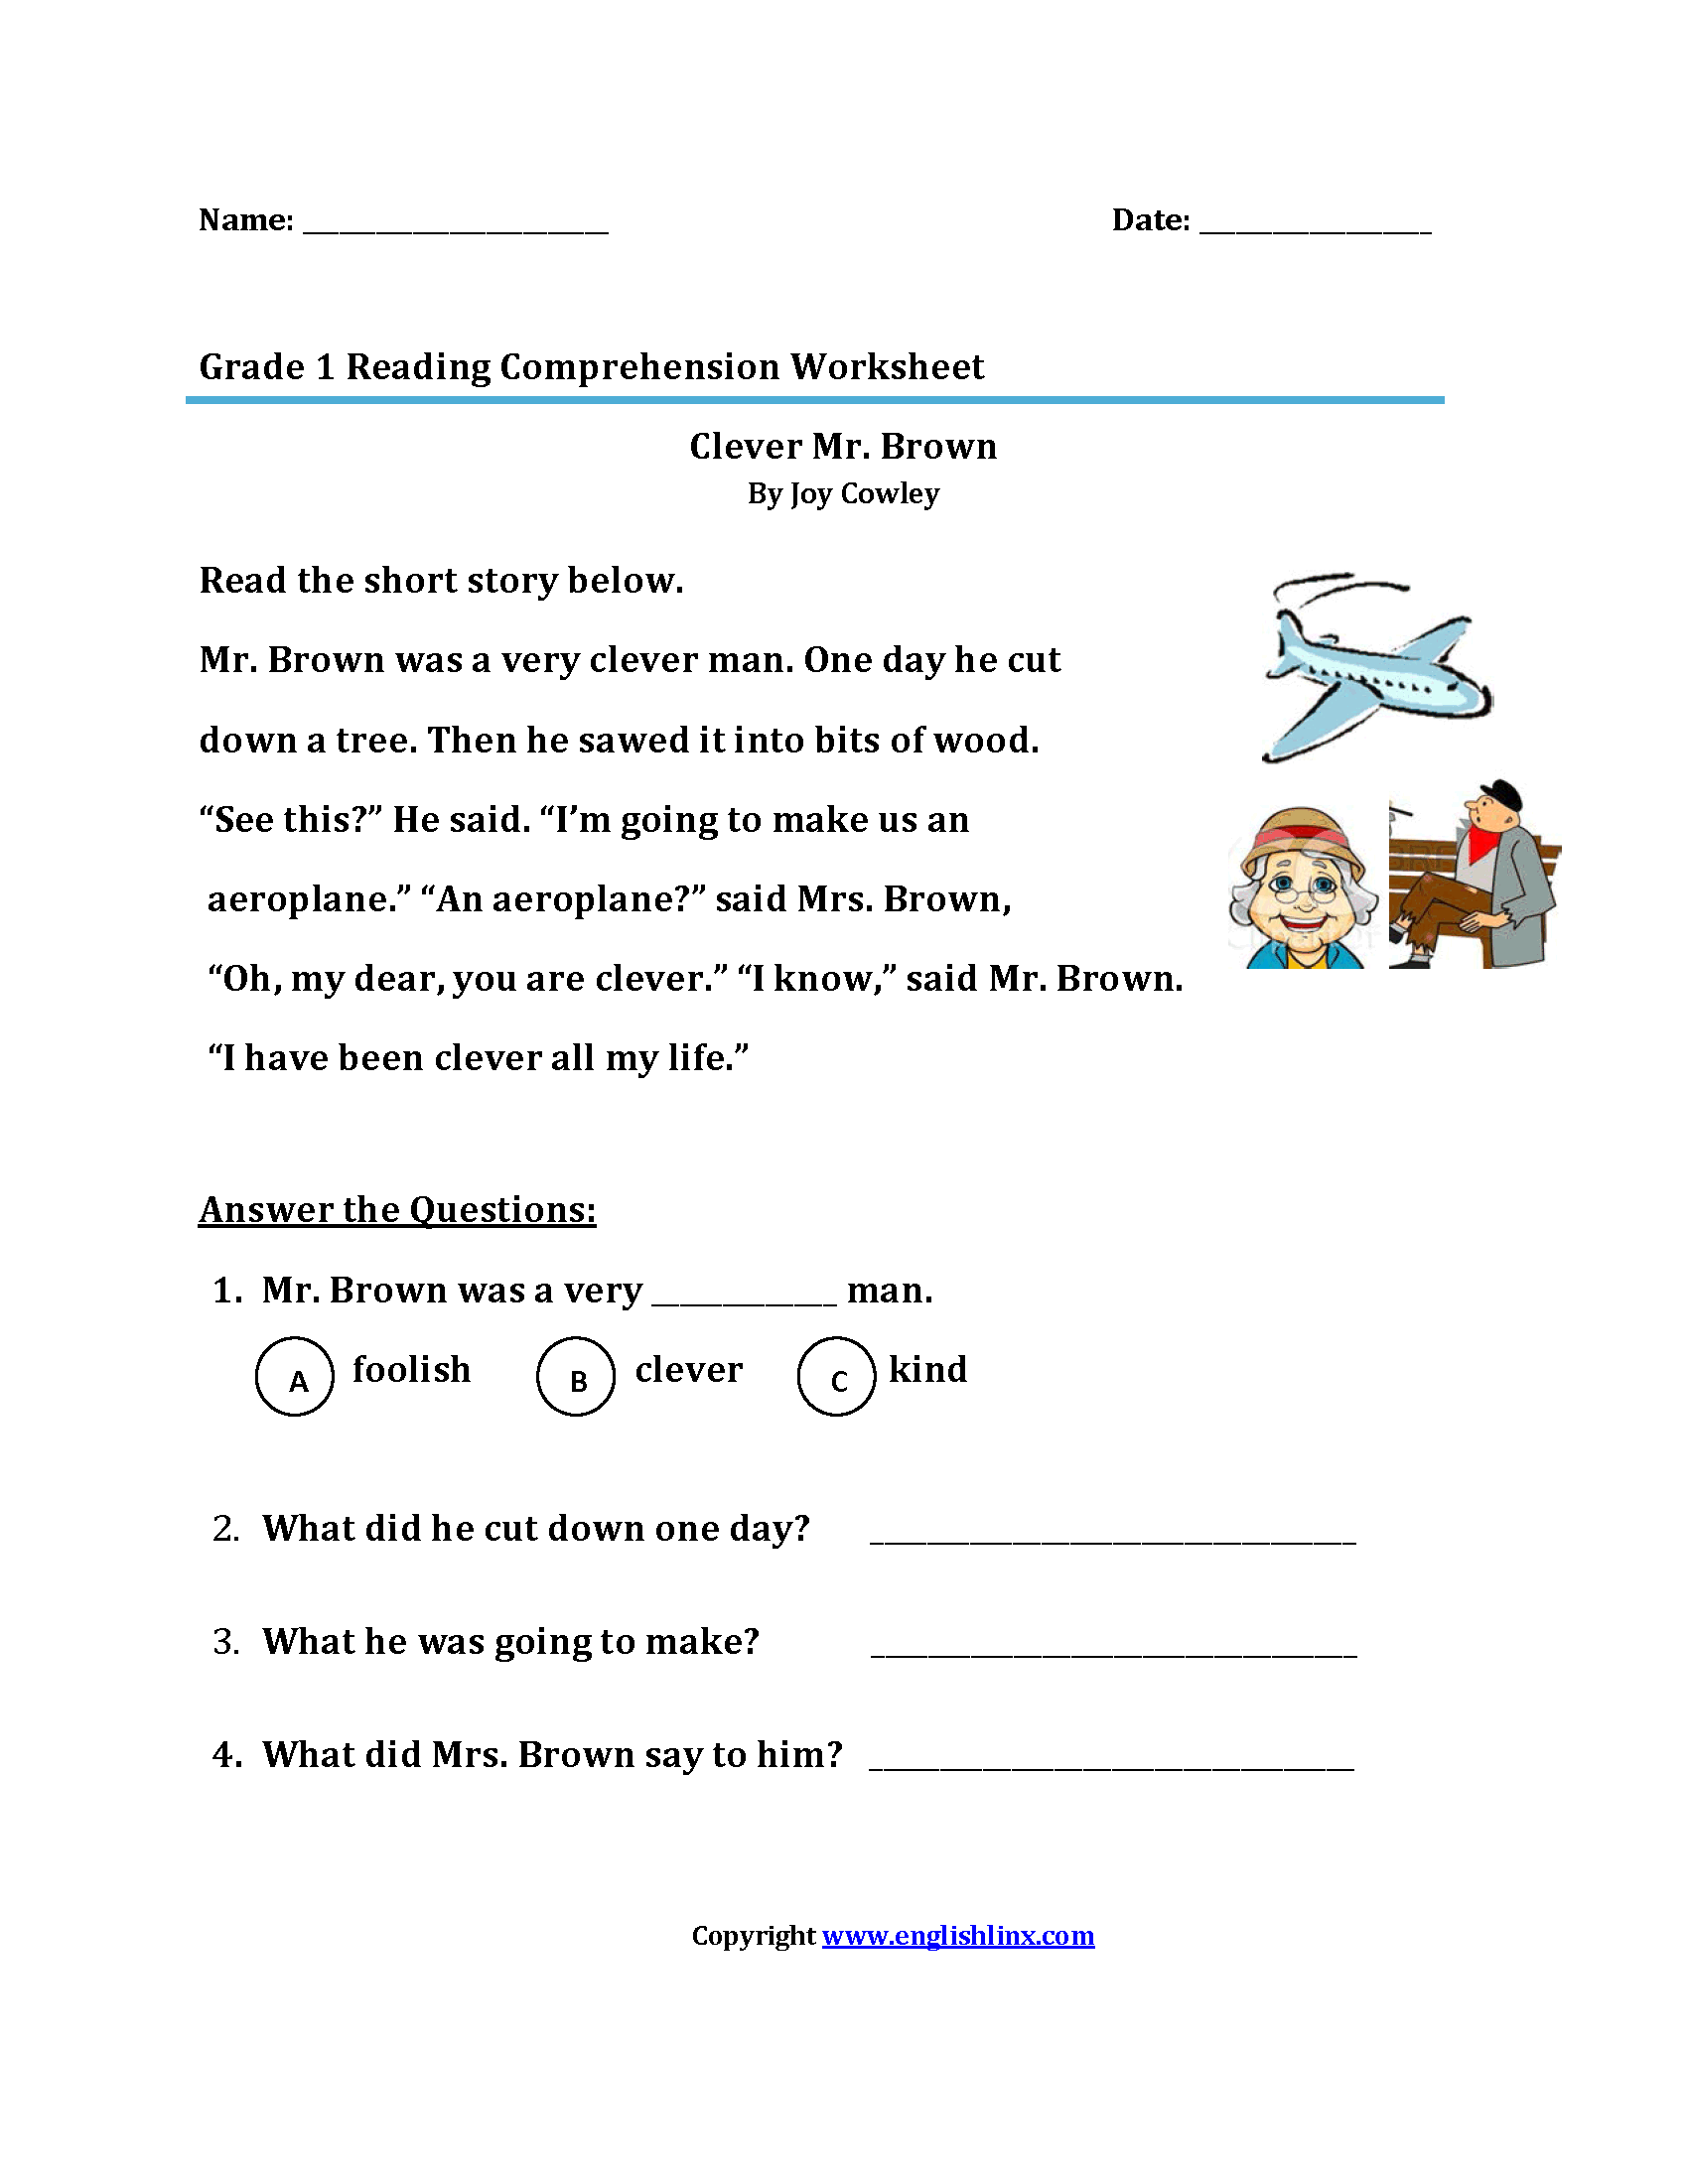 Clever Mr. Brown First Grade Reading Worksheets